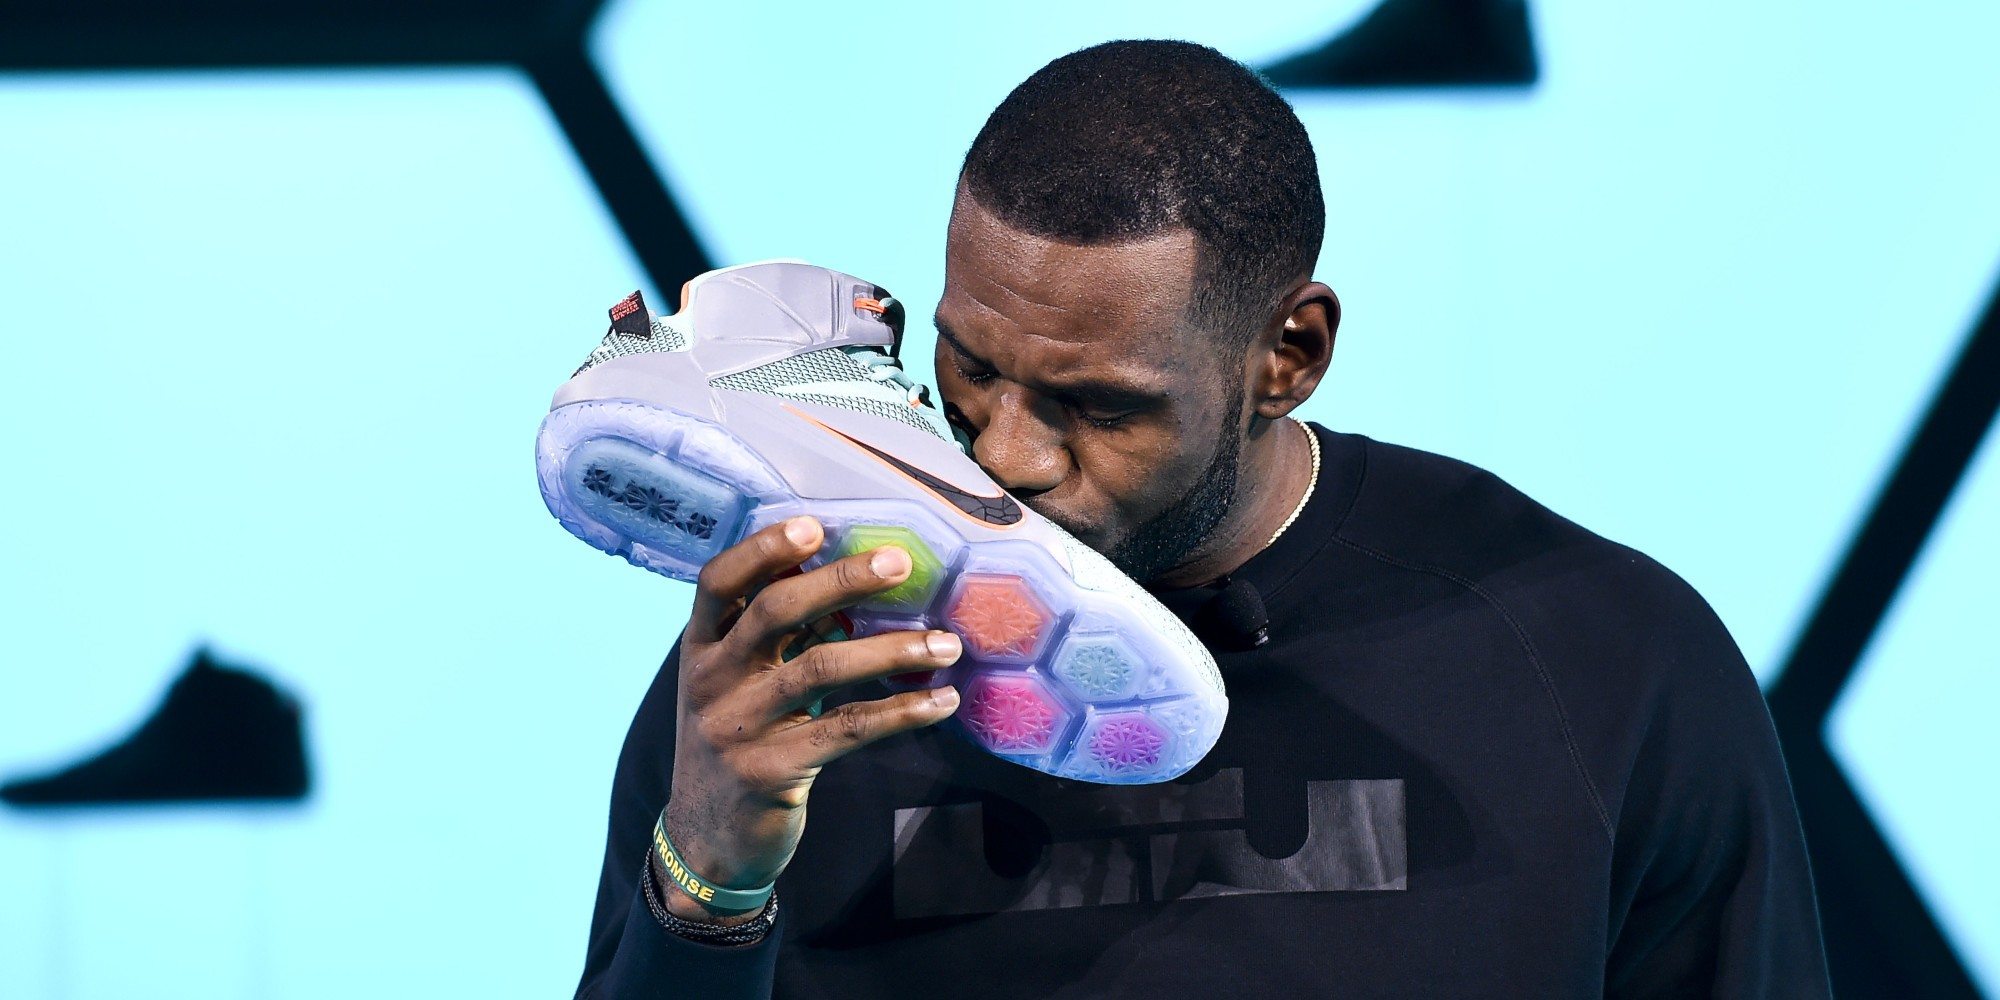 The Shoe Surgeon just gifted LeBron James $100k sneakers - ICON